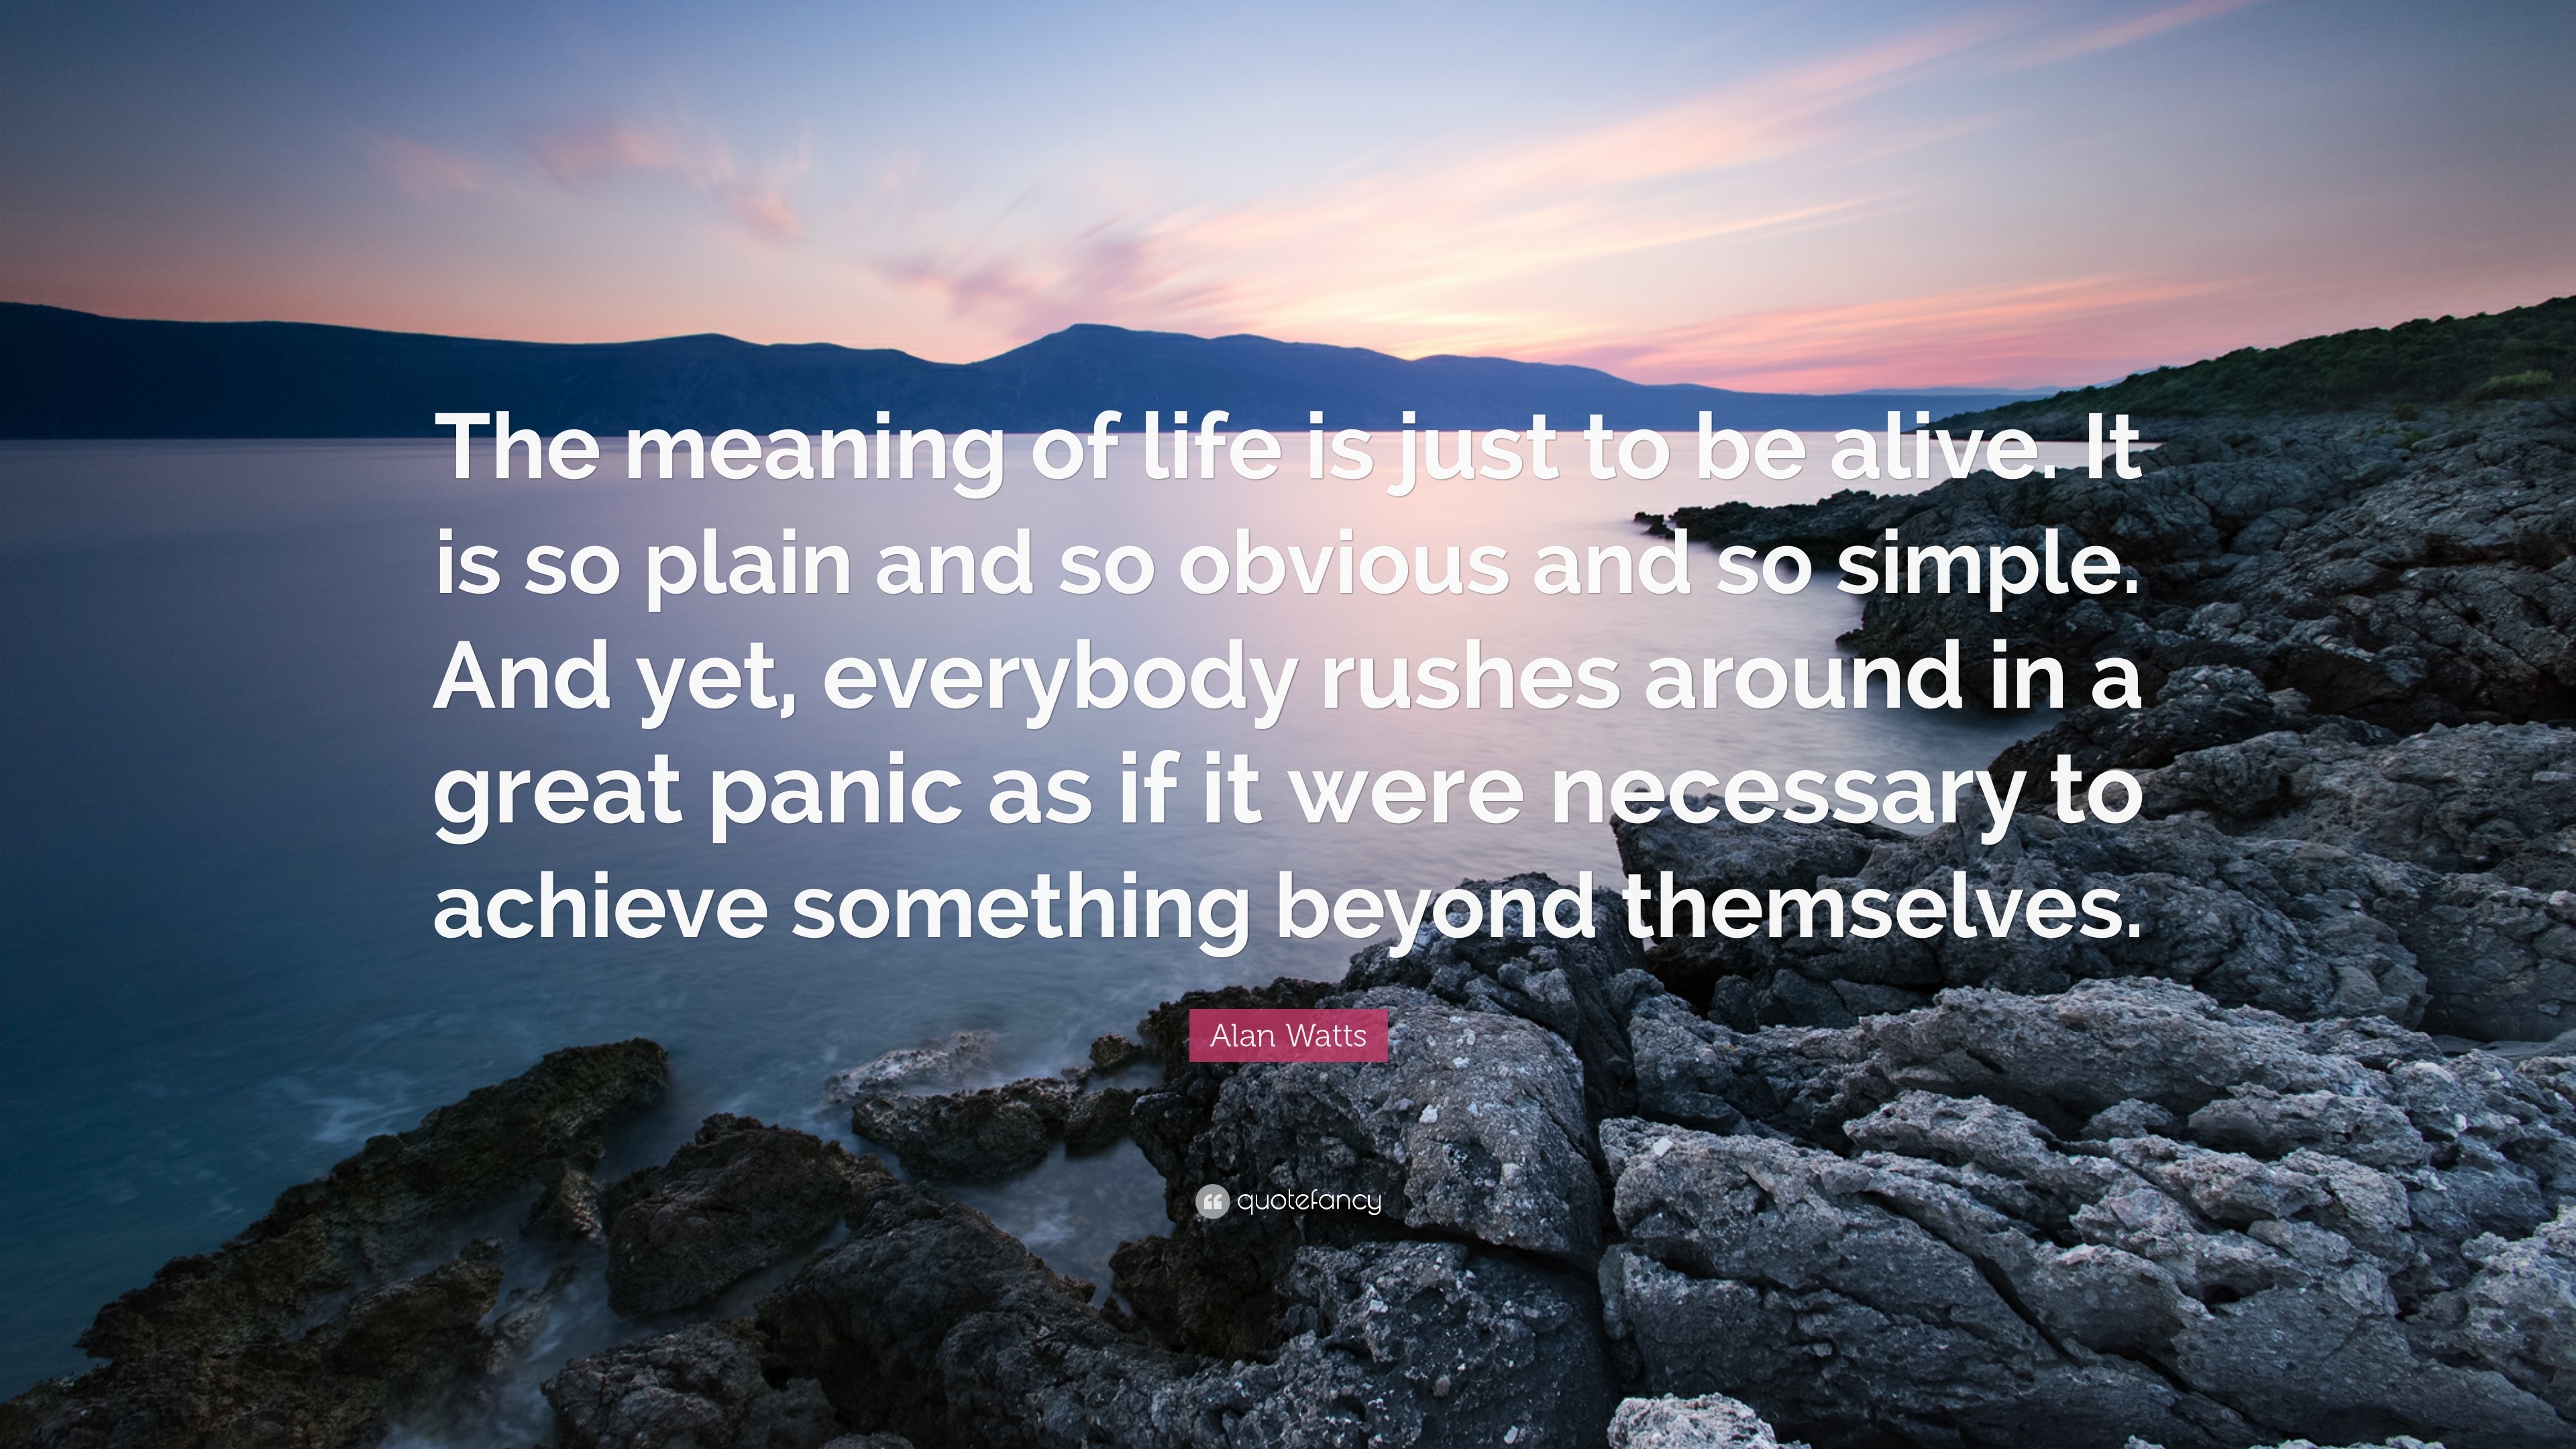 Alan Watts Quote  The meaning  of life  is just to be alive 